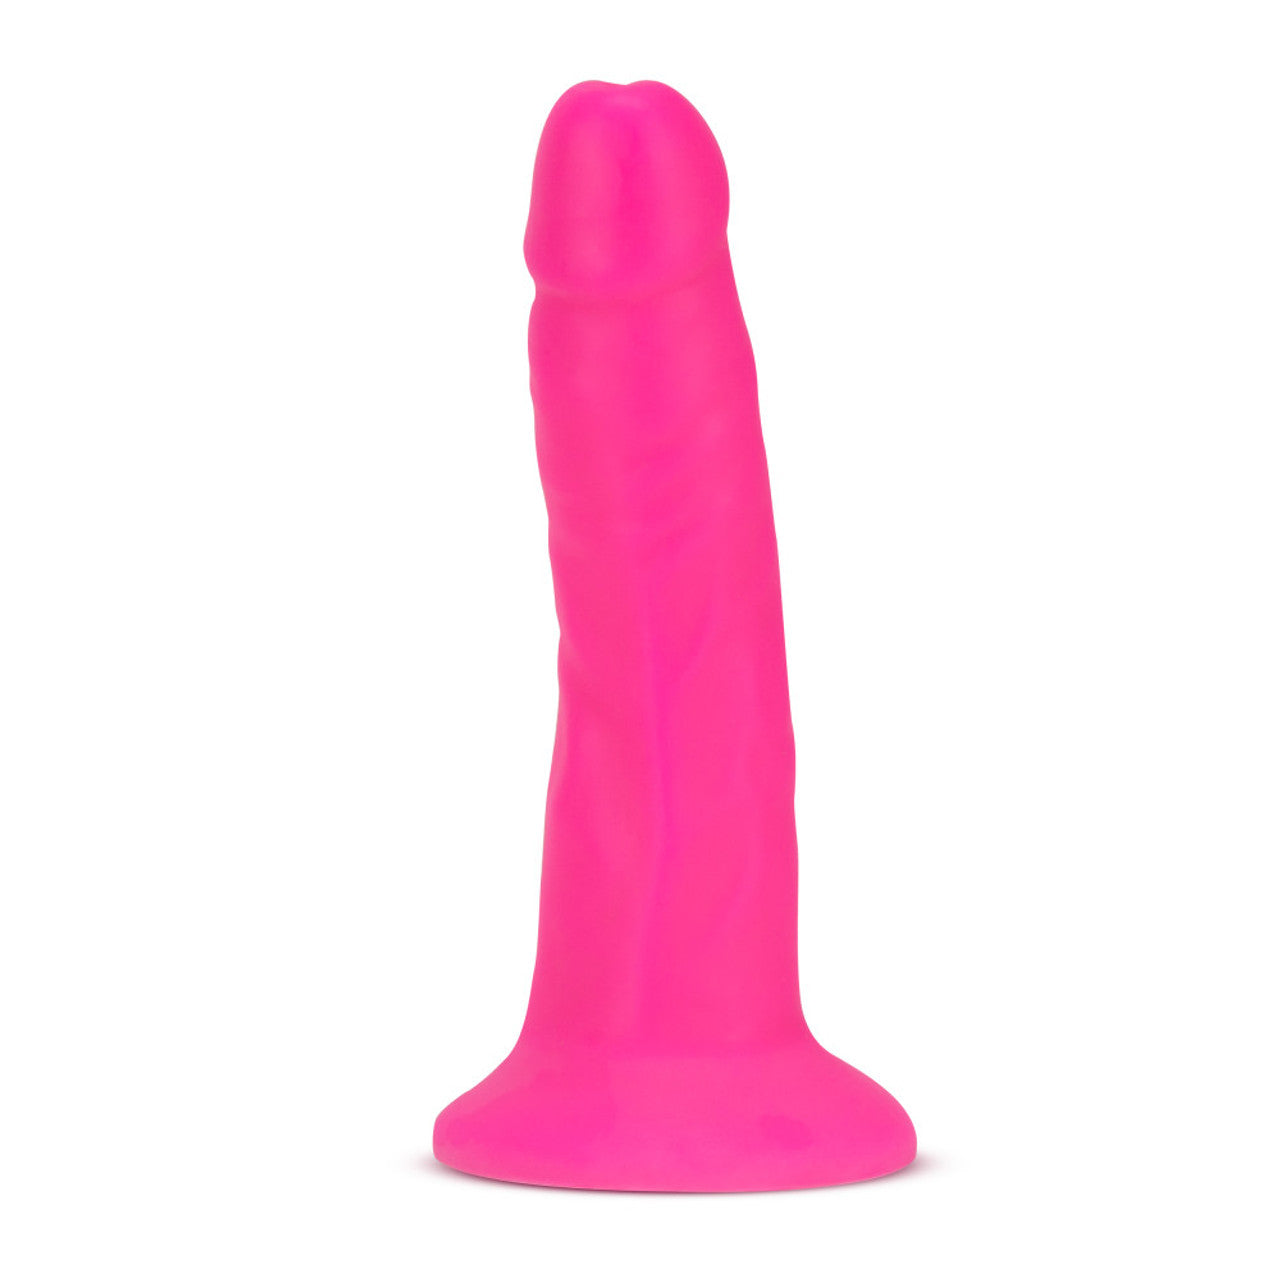 Neo Dual Density Cock - 6", Neon Pink - Thorn & Feather Sex Toy Canada